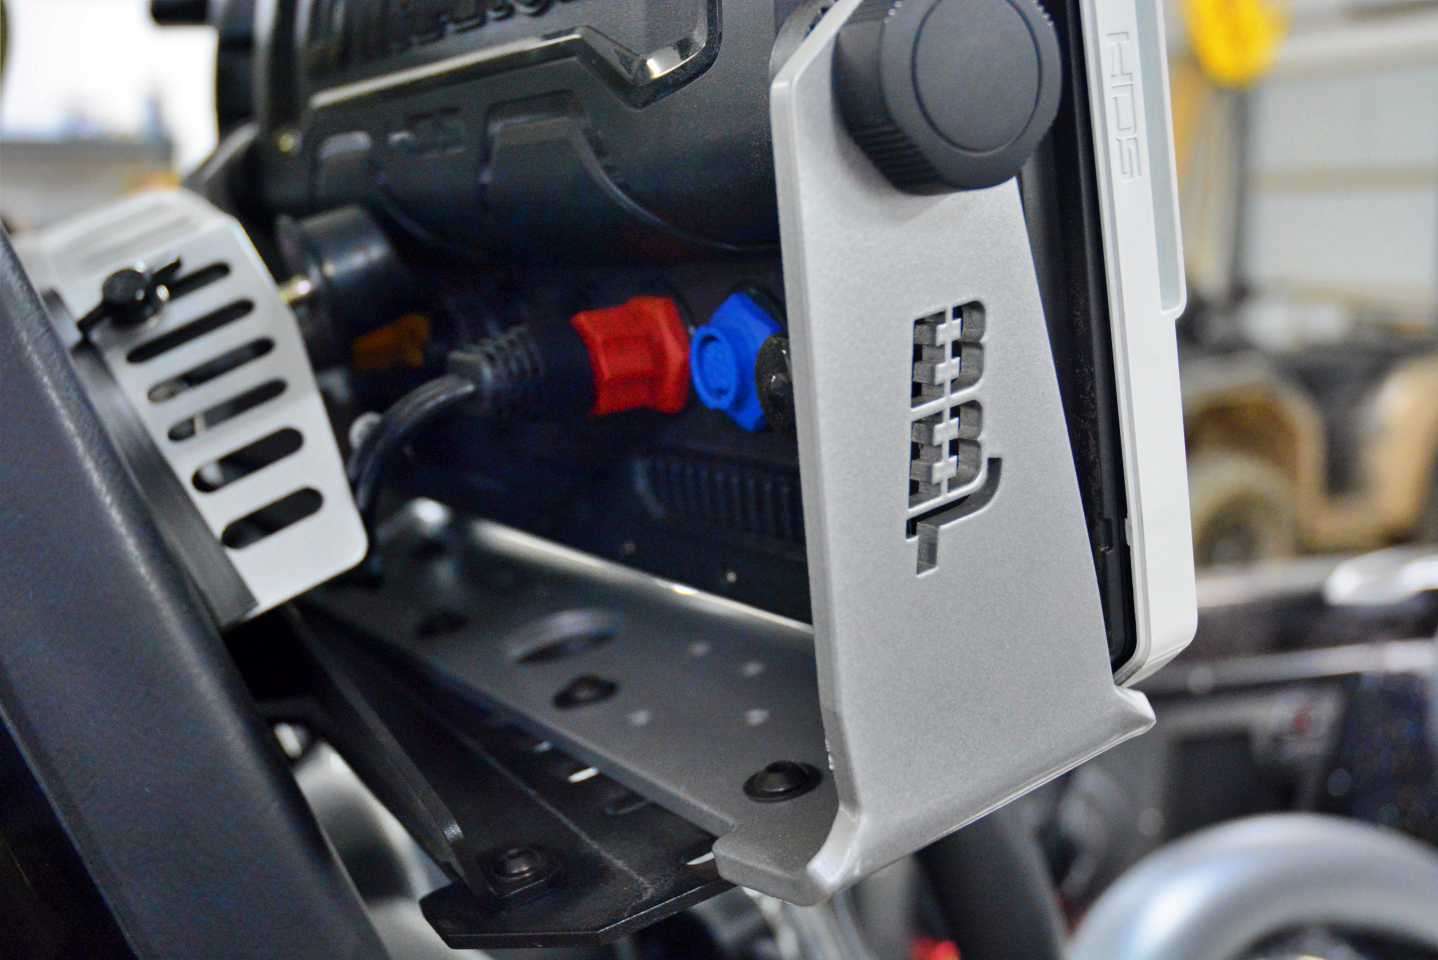 The units are mounted on a Bass Boat Technologies Dual Dash Mount, designed specifically for the Falcon F20.  